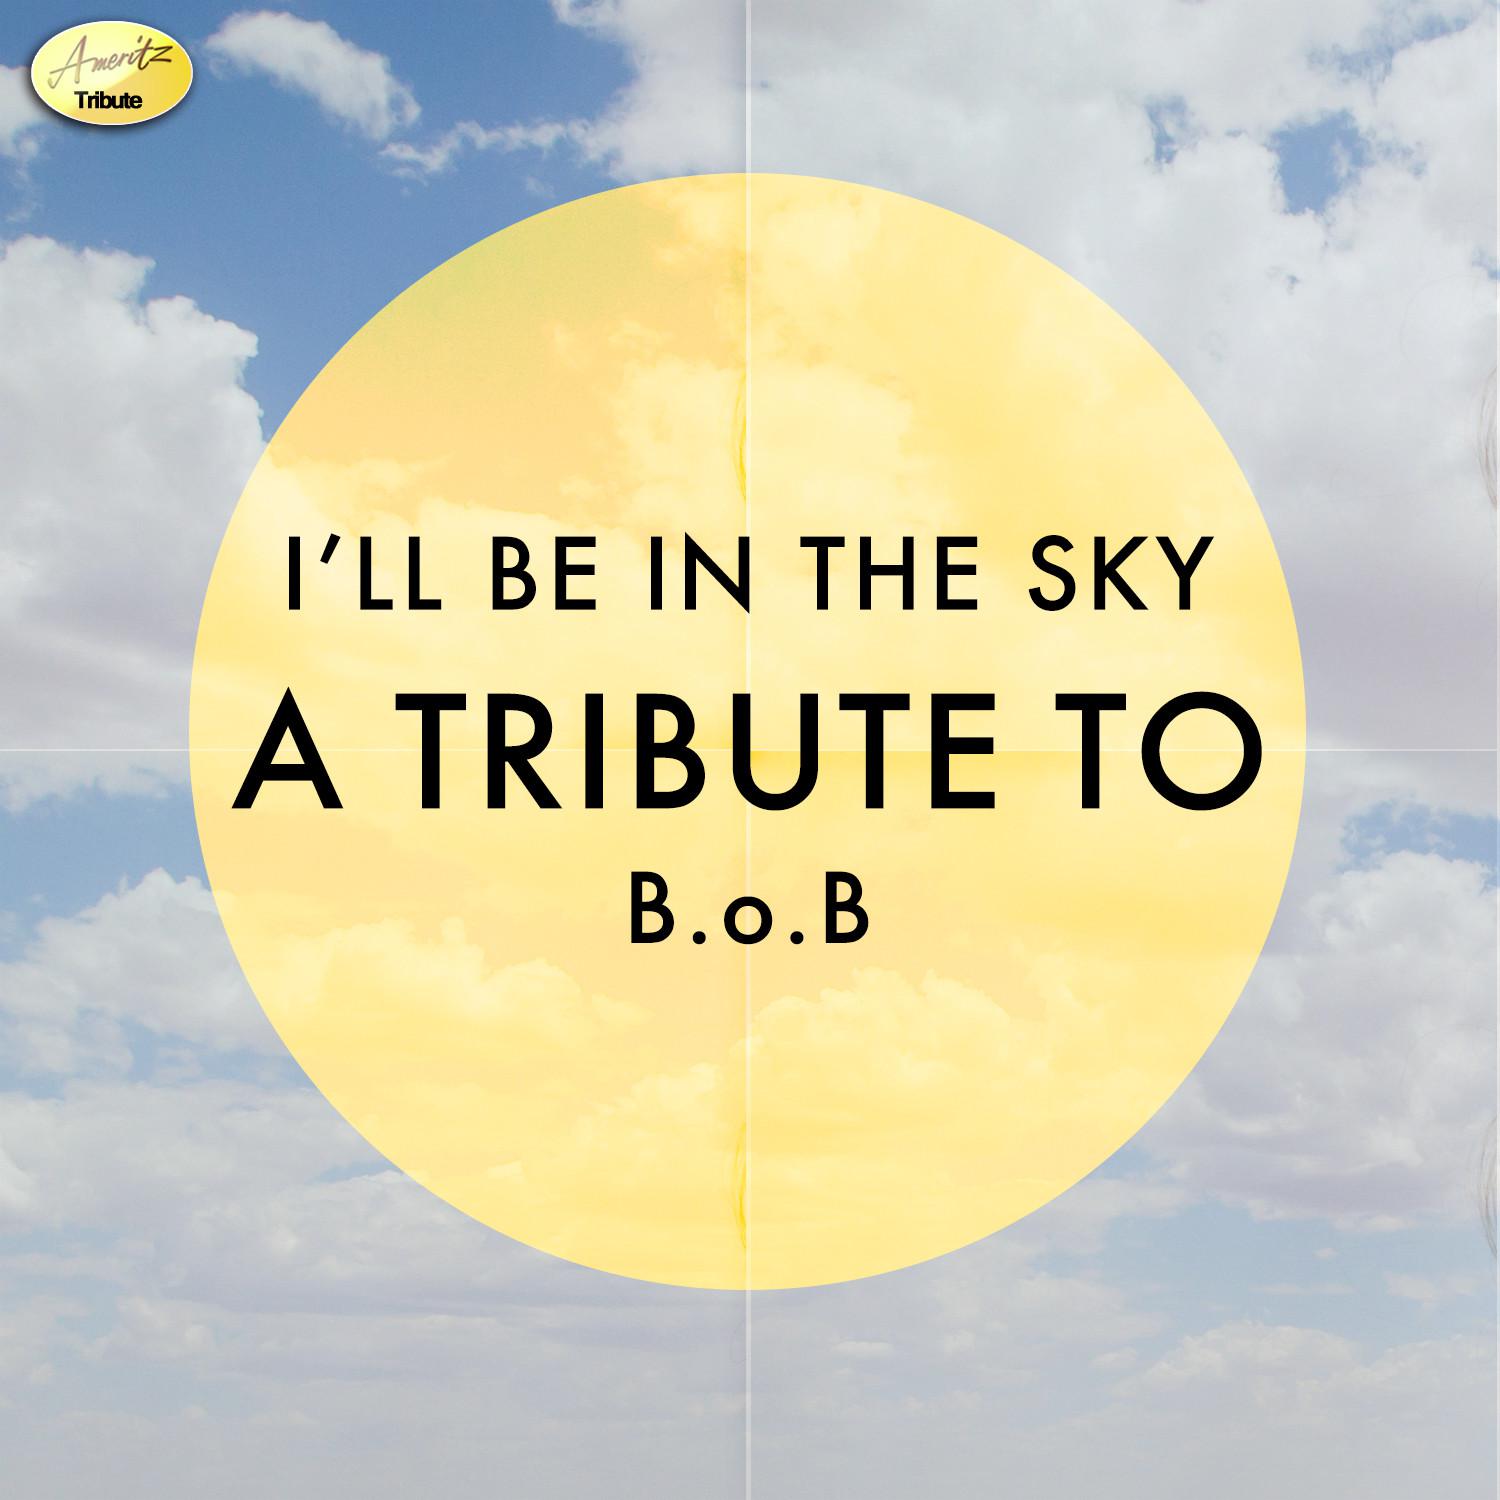 I'll Be in the Sky - A Tribute to B.o.B